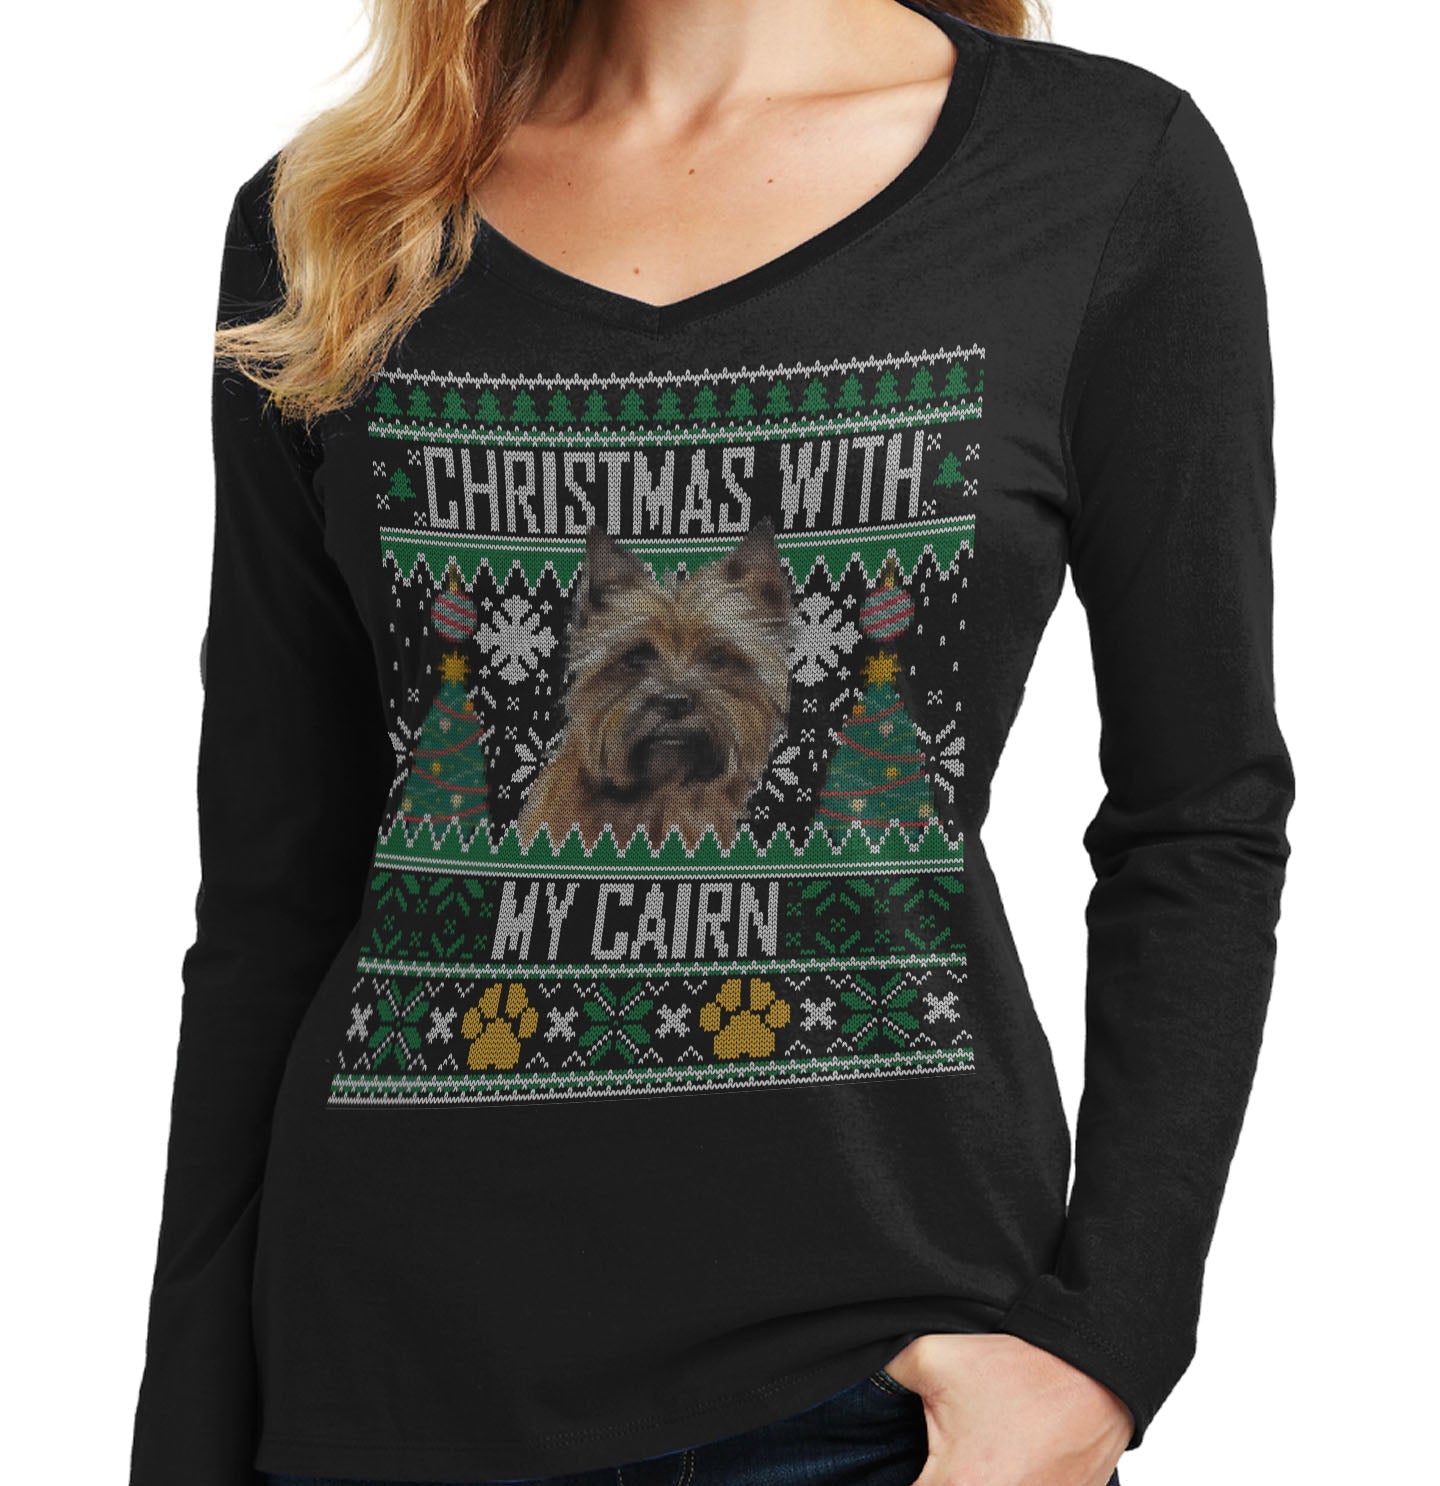 Ugly Sweater Christmas with My Cairn Terrier - Women's V-Neck Long Sleeve T-Shirt